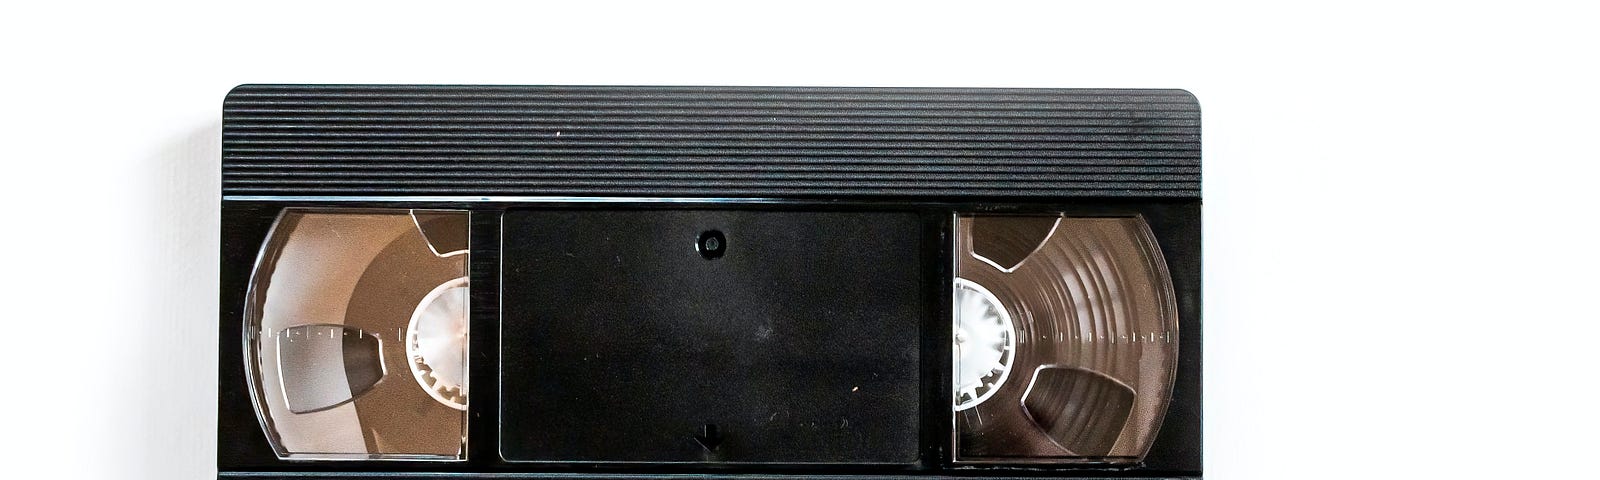 A VHS Tape